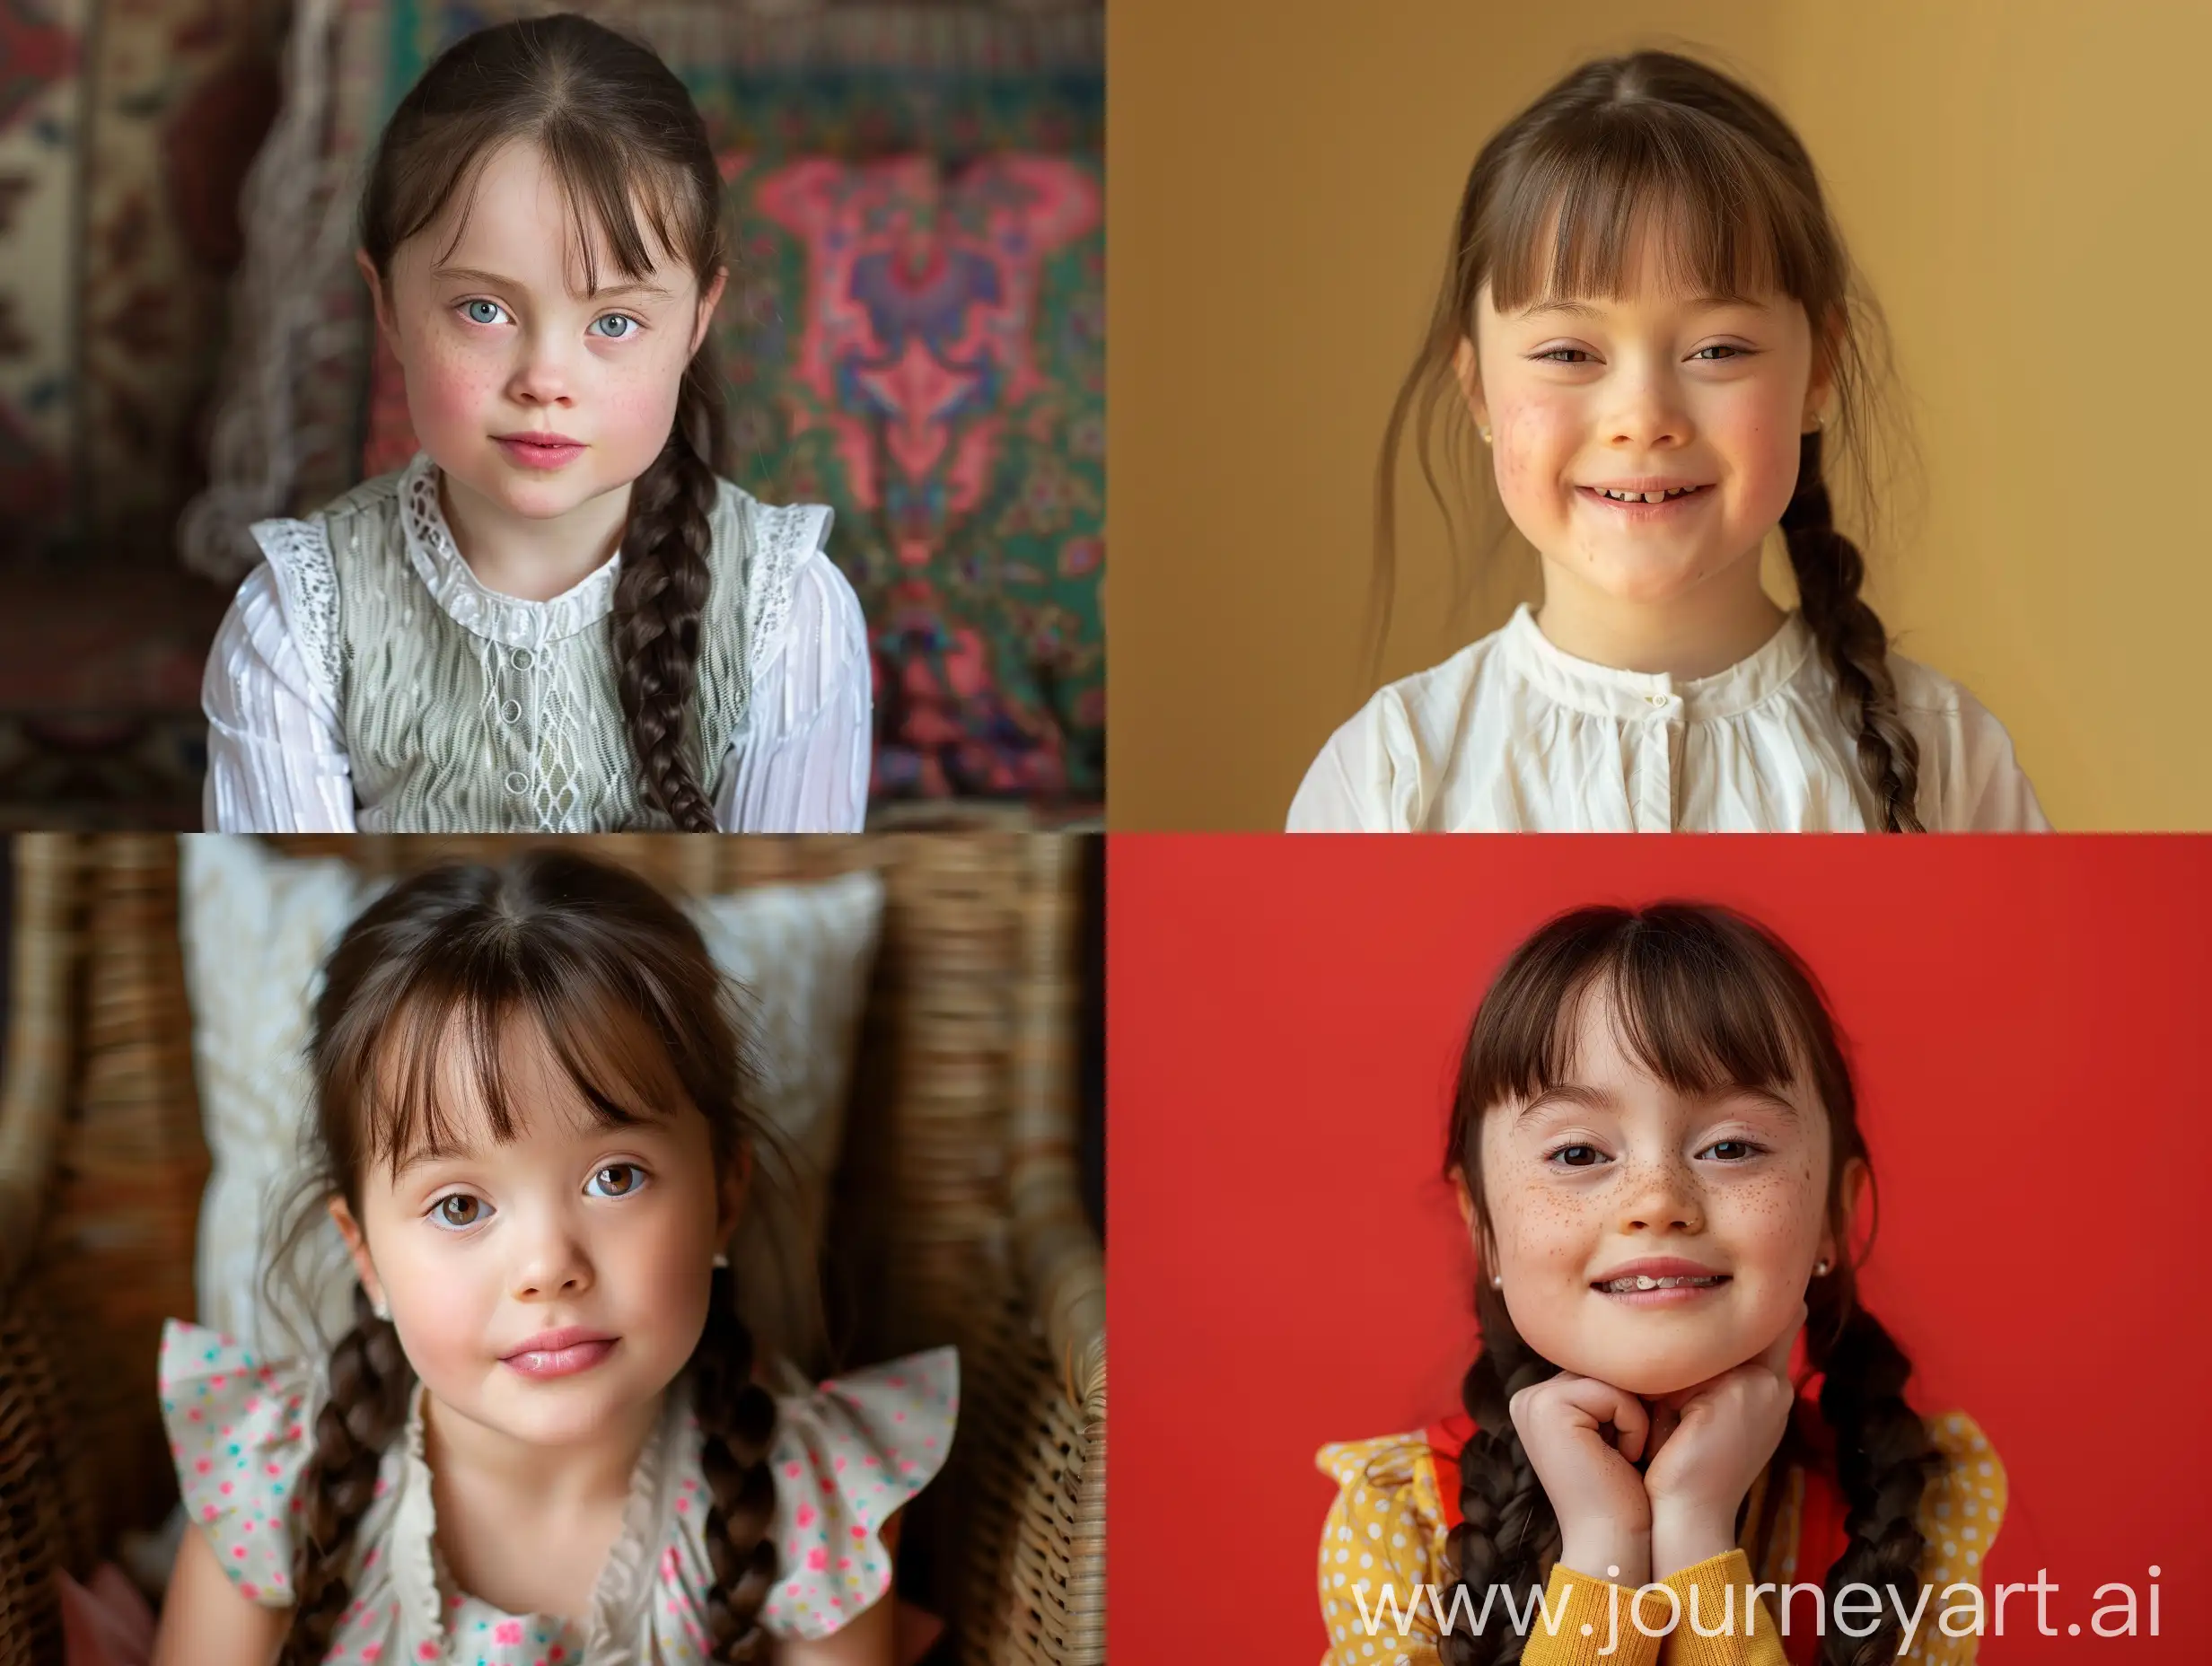 Inspirational-Portrait-of-a-Joyful-10YearOld-Girl-with-Down-Syndrome